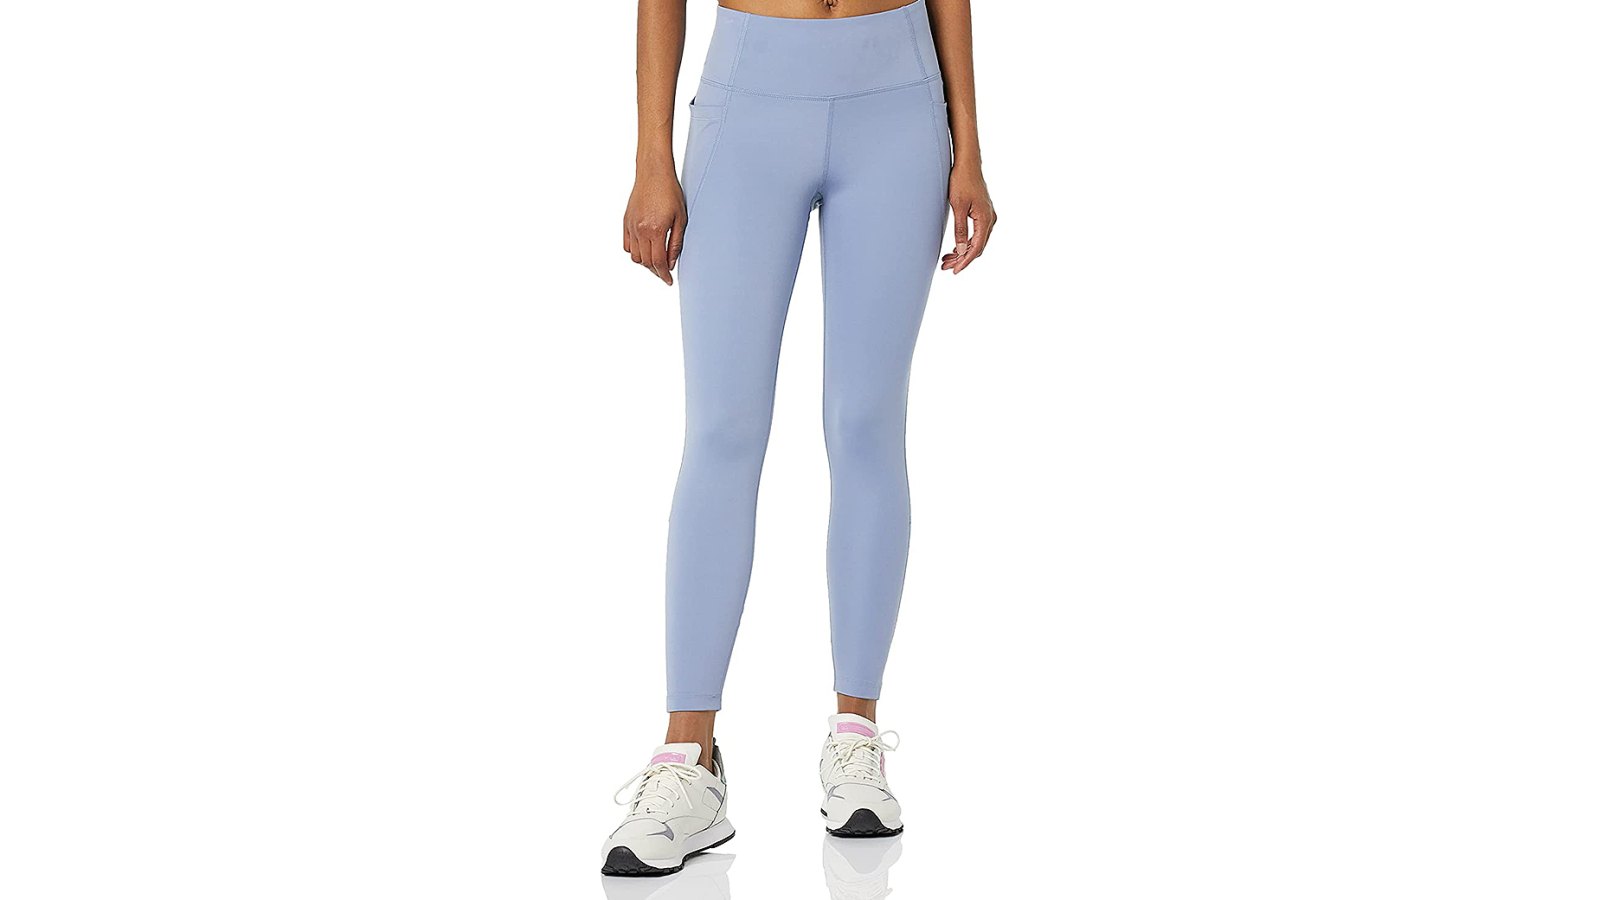 Core 10 Leggings Will Have You Looking Forward to Your Workouts